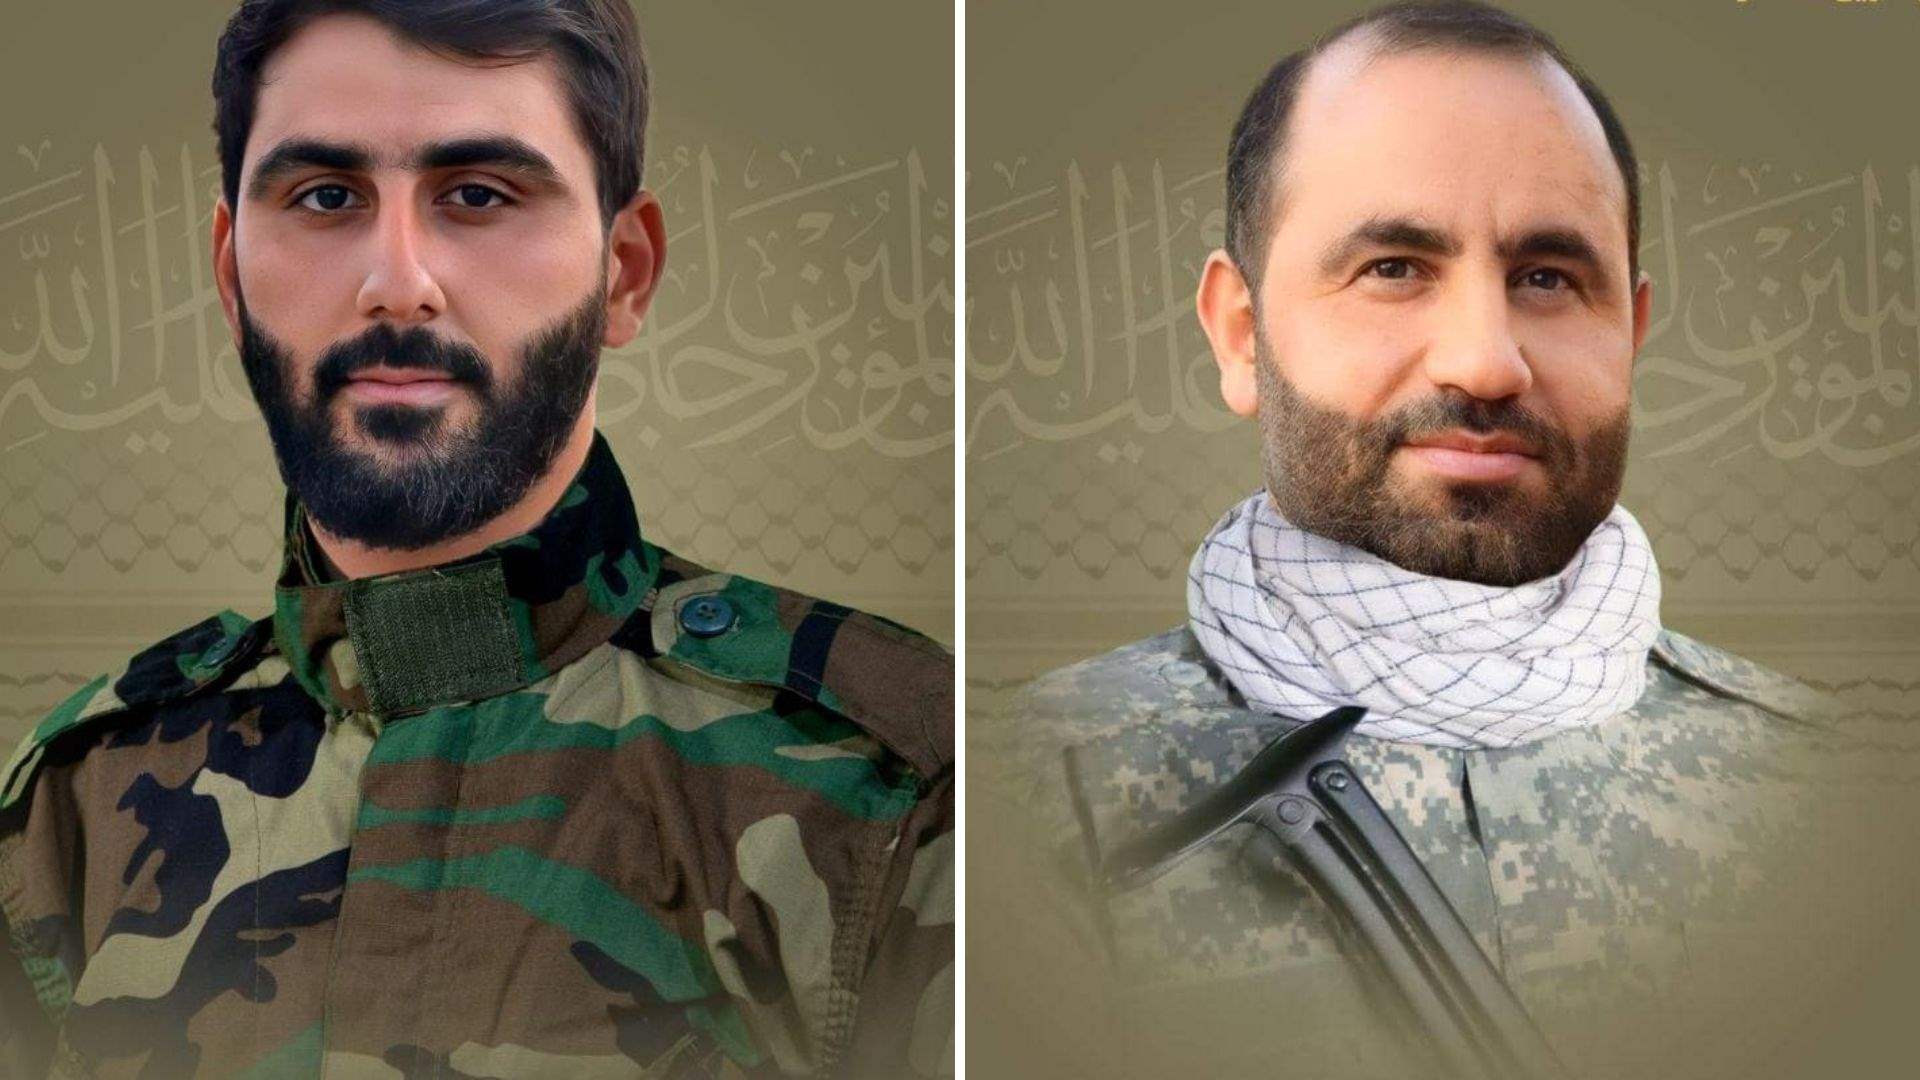 Hezbollah mourns loss of two martyrs from Southern Lebanon